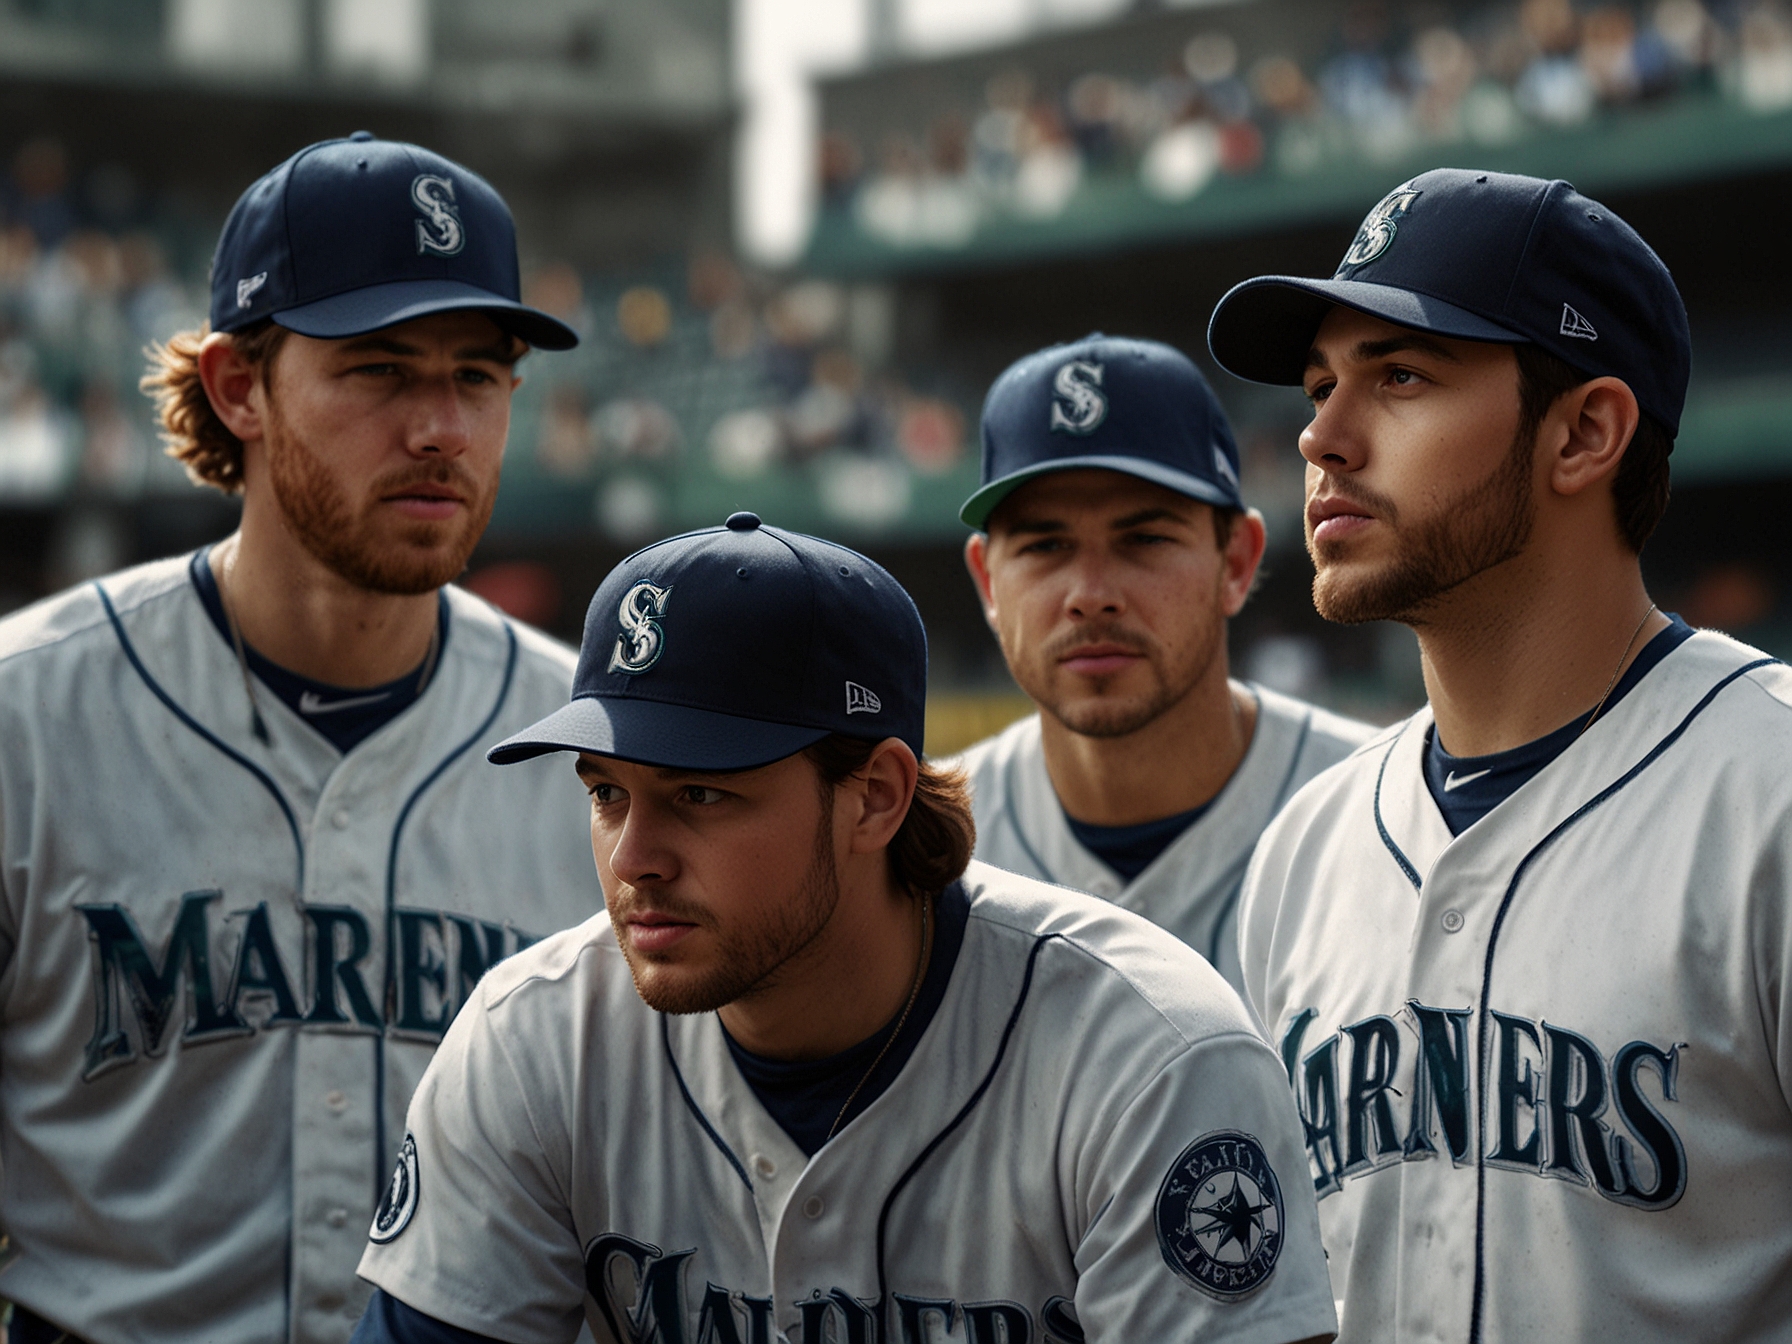 Seattle Mariners players huddled on the field with determination in their eyes, showcasing team spirit and chemistry as they strategize during a high-stakes game of the season.